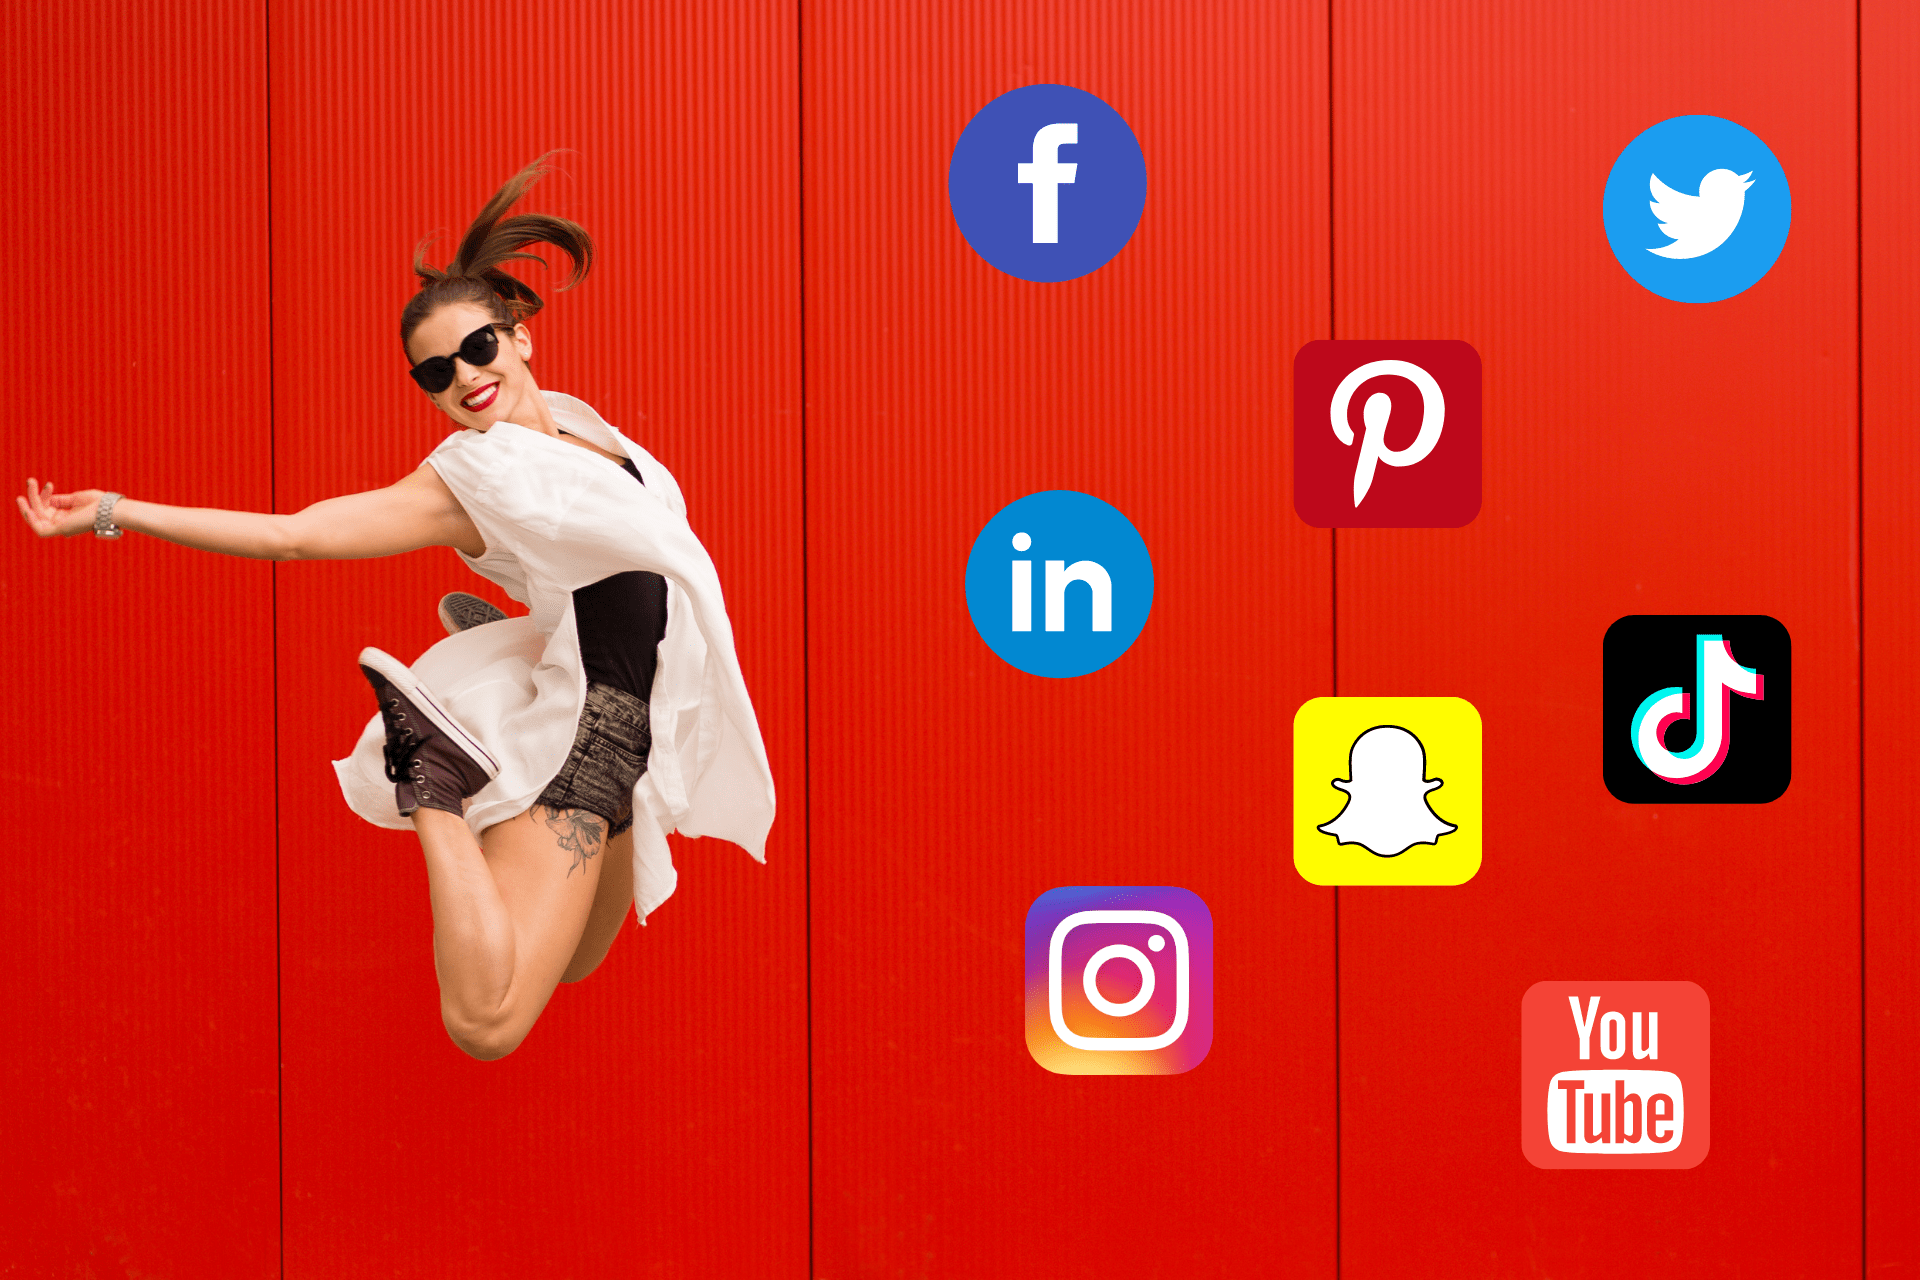 Stay active on social media